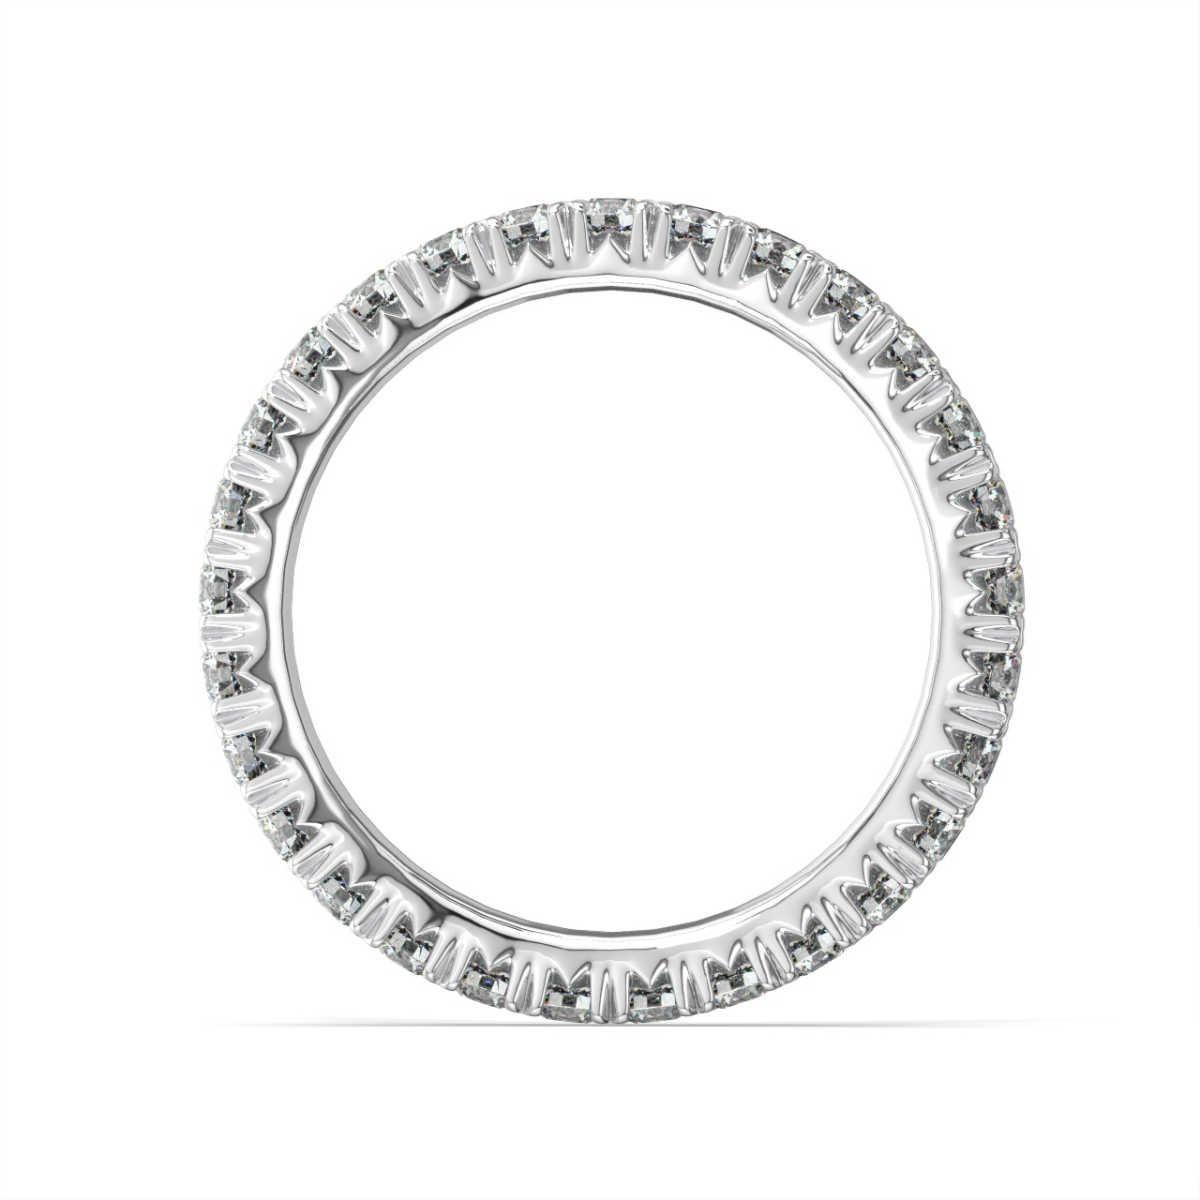 This stunning eternity band features French pave diamonds, a setting style that allows light to reach our perfectly matched diamonds from many angles. It sparkles like no other eternity ring. Experience the difference!

Product details: 

Center